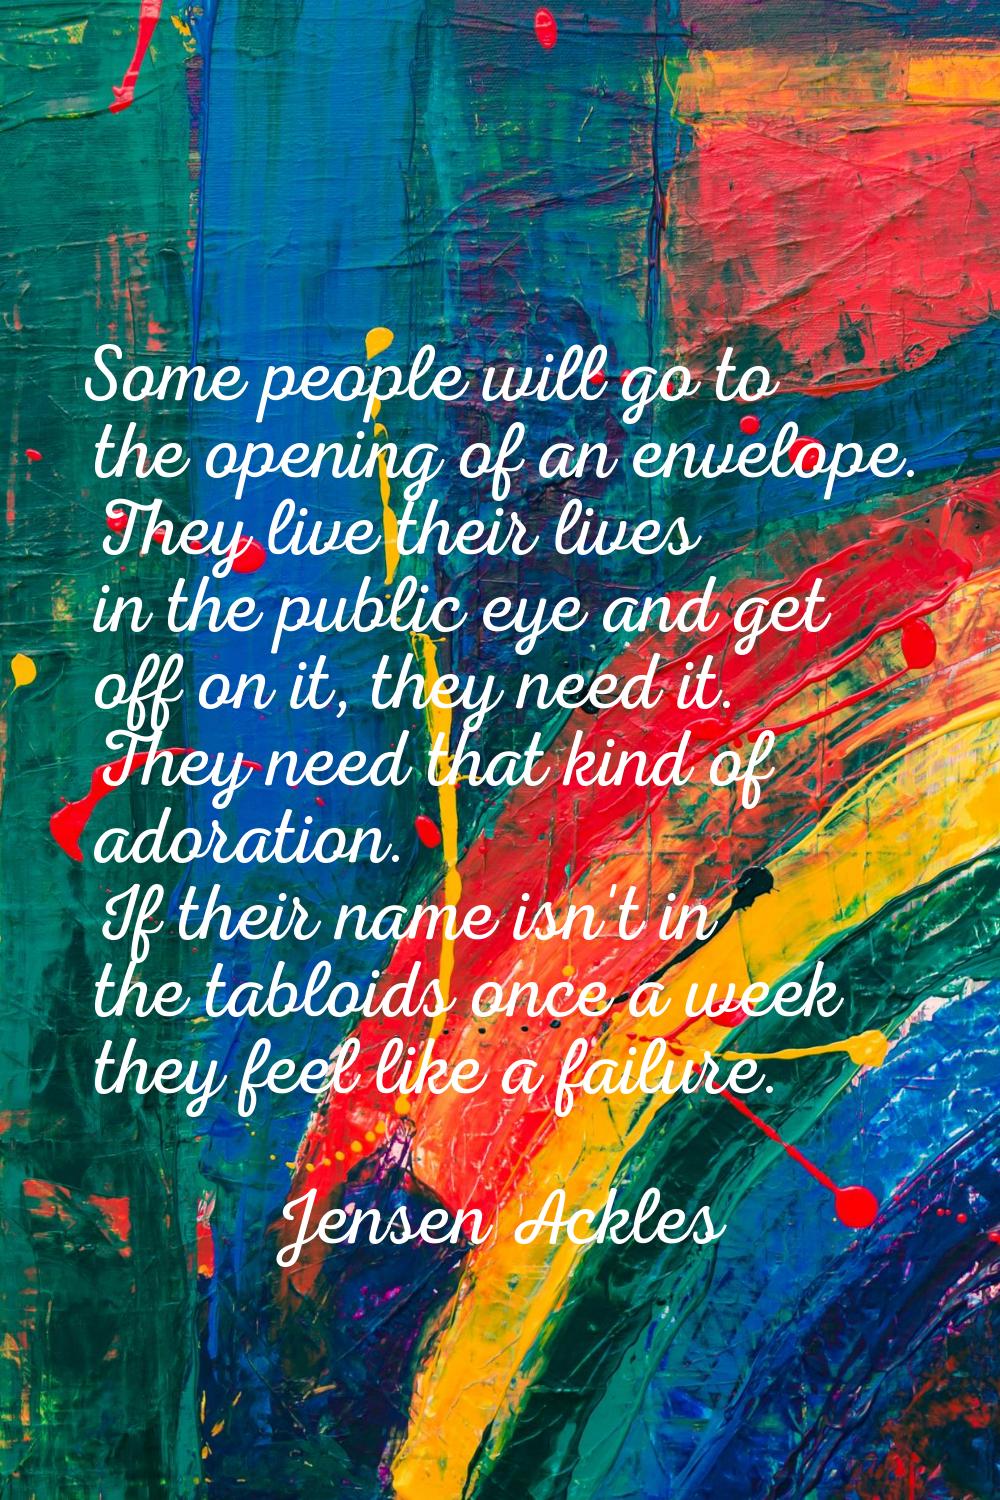 Some people will go to the opening of an envelope. They live their lives in the public eye and get 